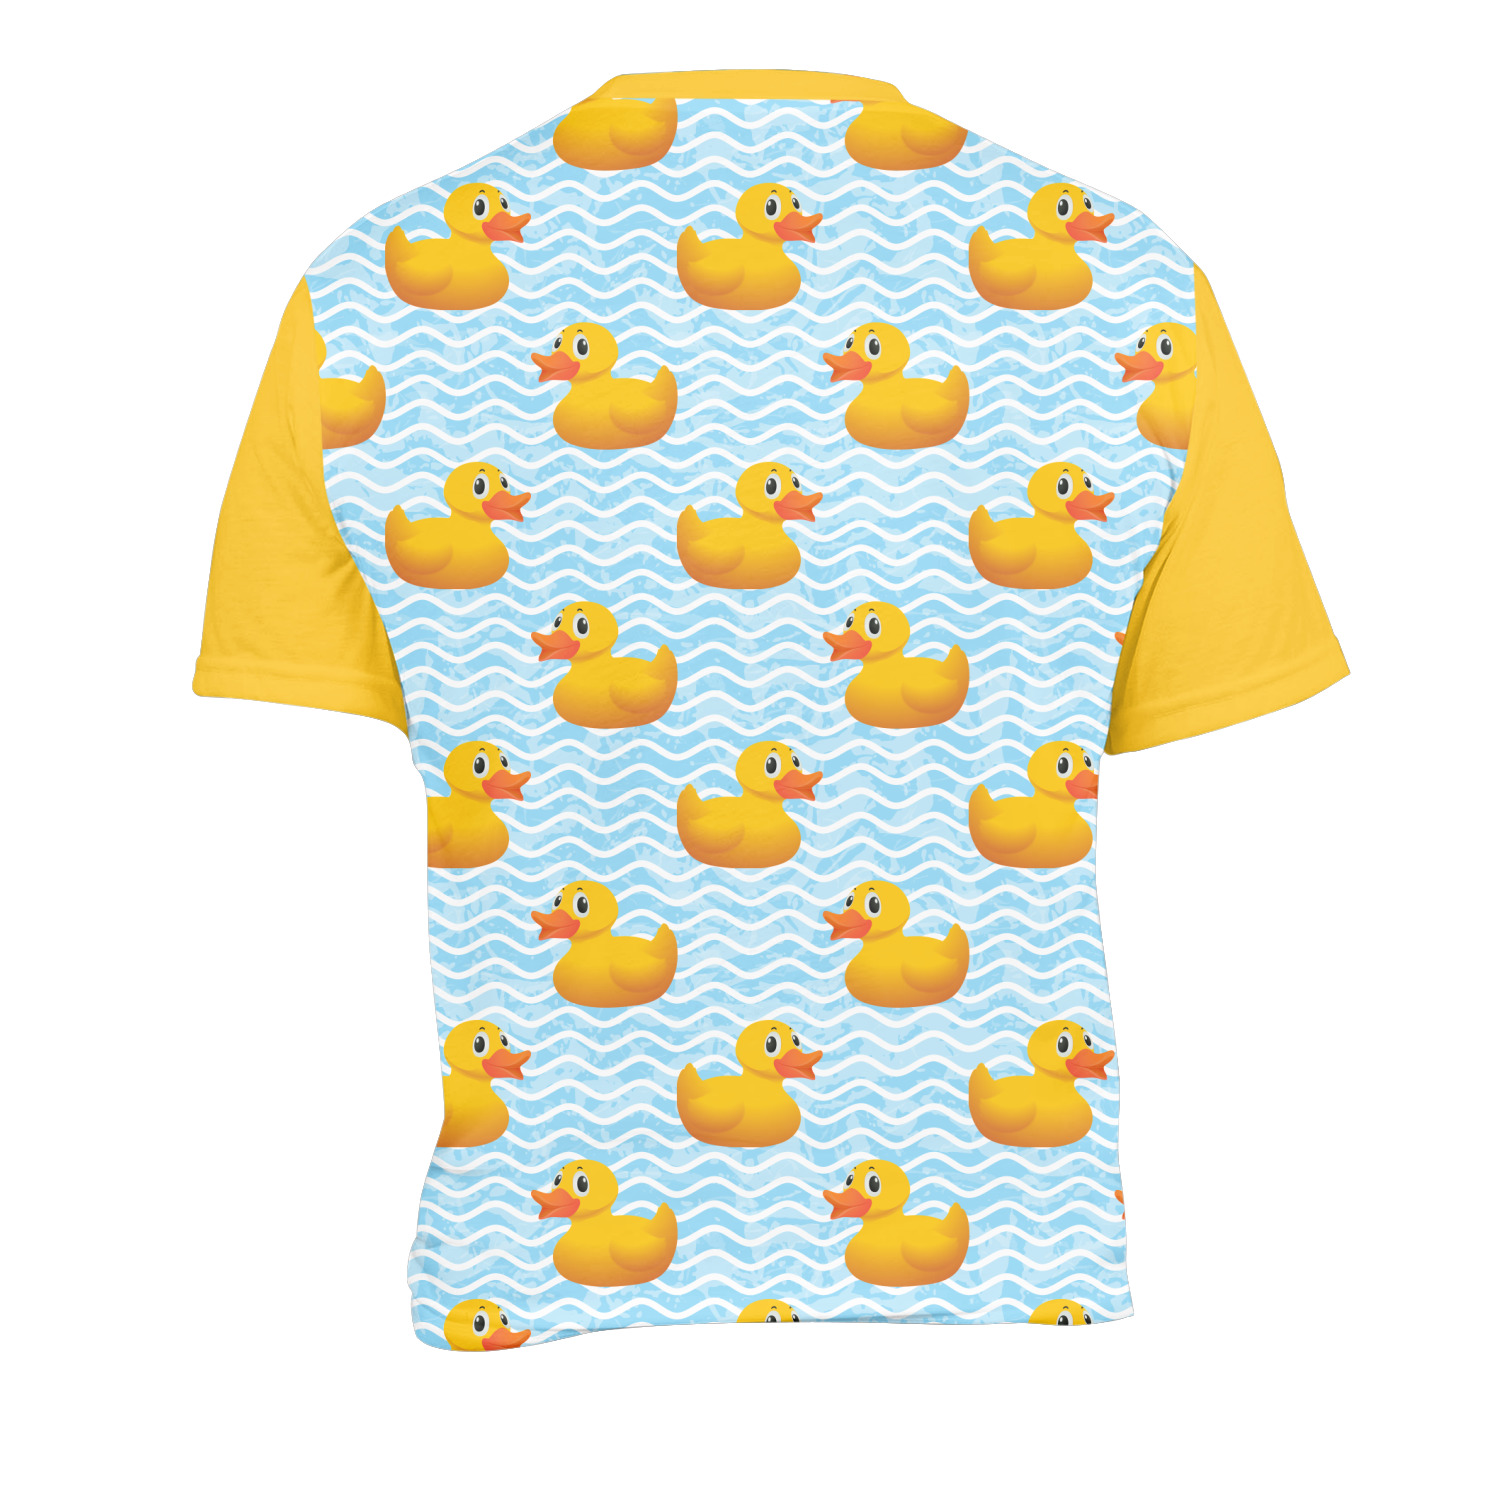 Rubber Duckie Men's Crew T-Shirt - 2X Large (Personalized) - YouCustomizeIt